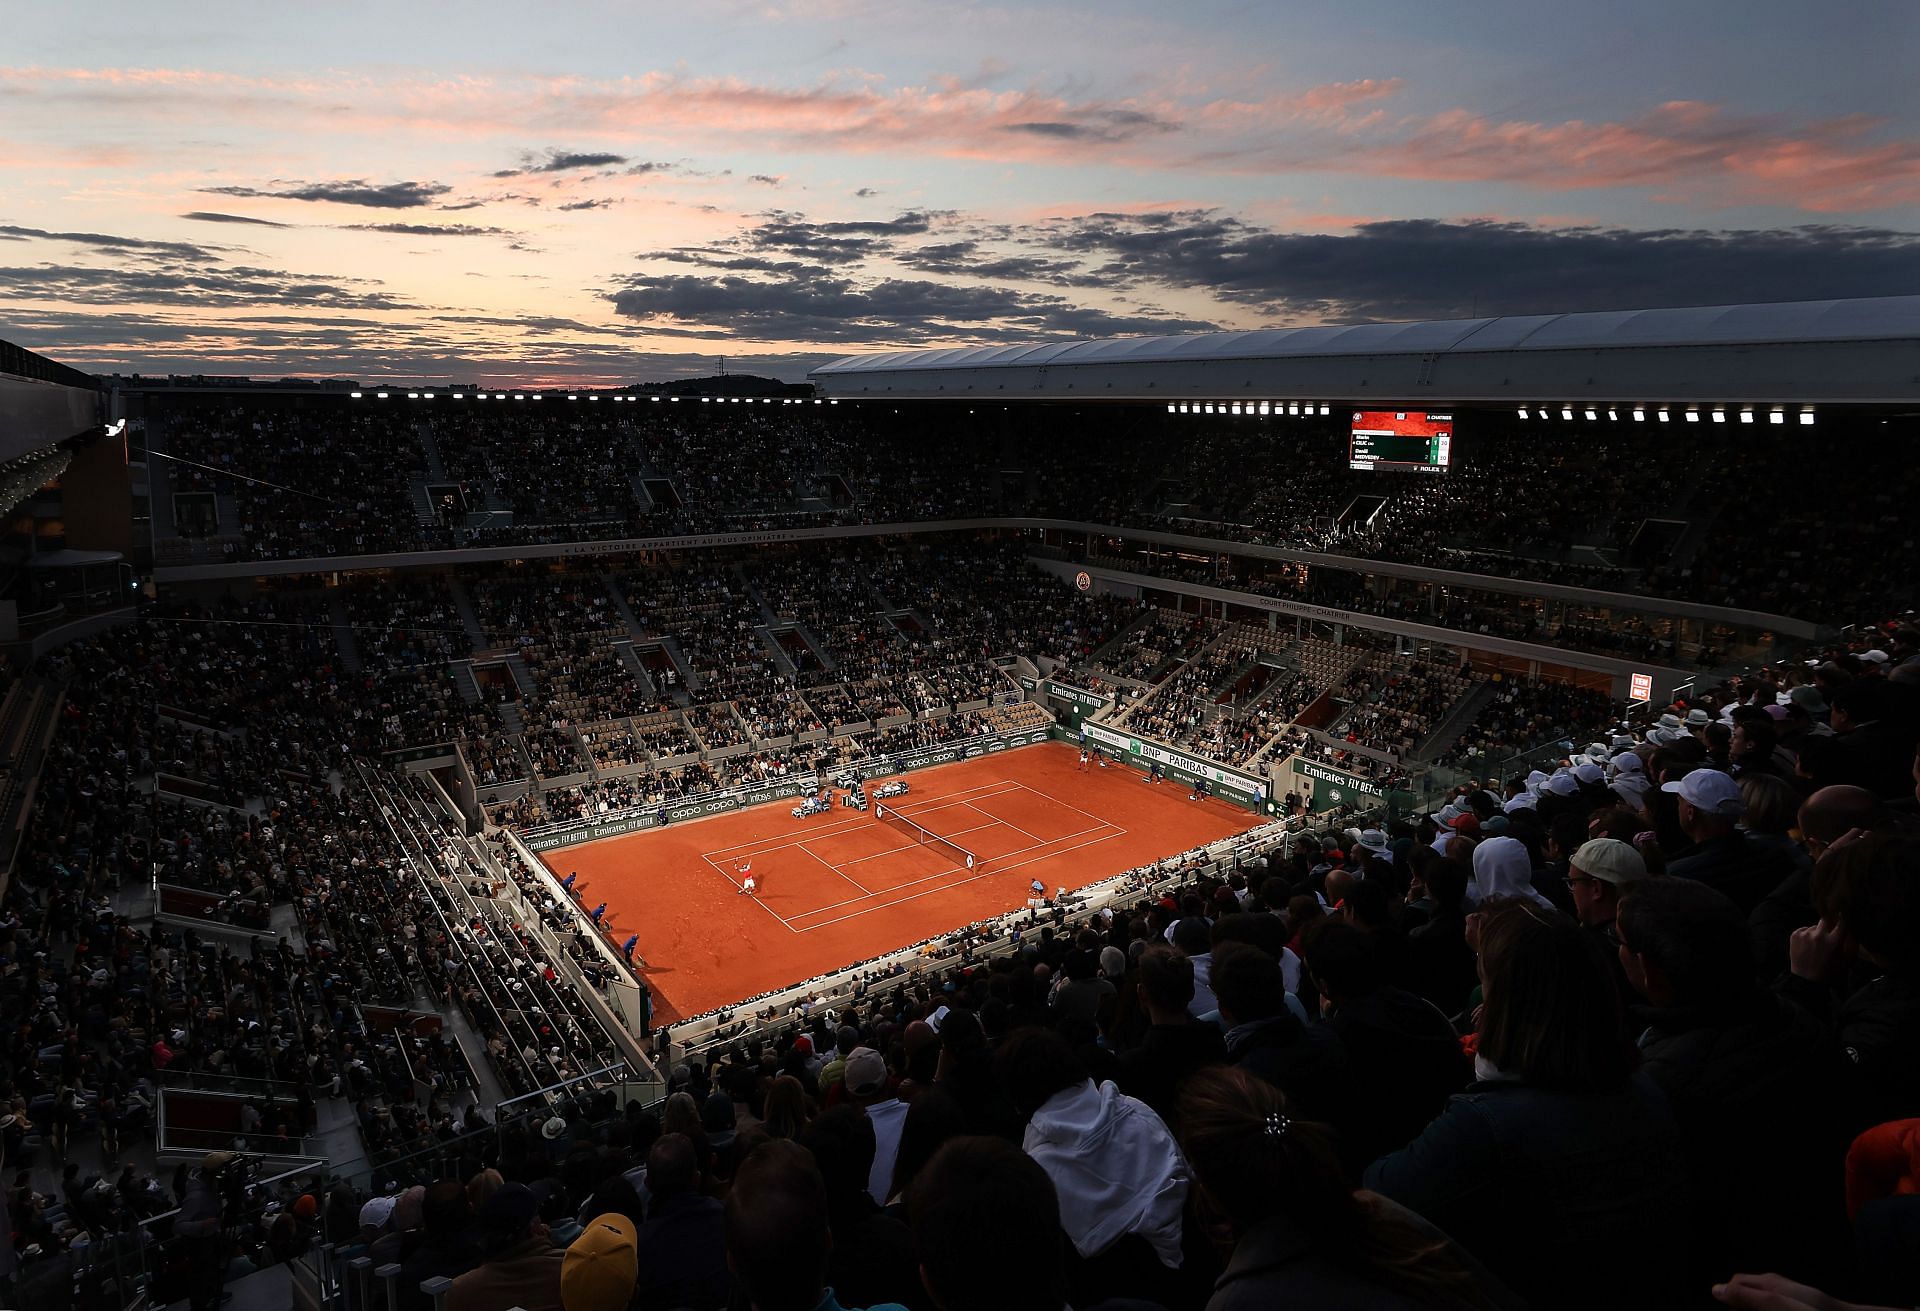 Court Philippe-Chatrier will play host to the French Open semifinal clash between Rafael Nadal and Alexander Zverev.